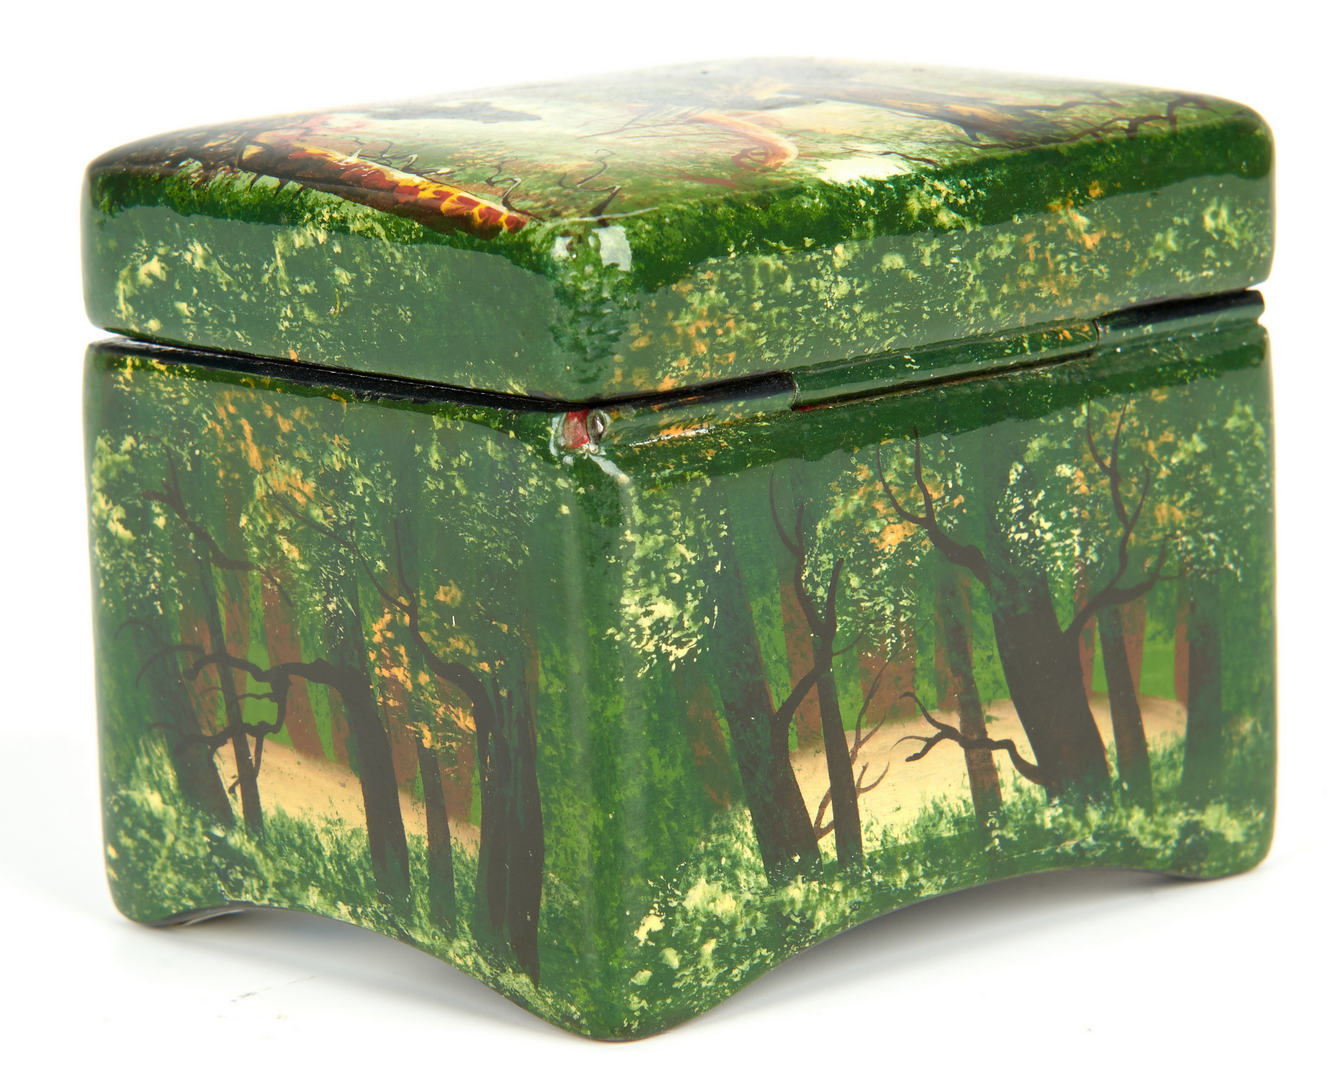 Lot 919: 15 Russian Lacquer Boxes